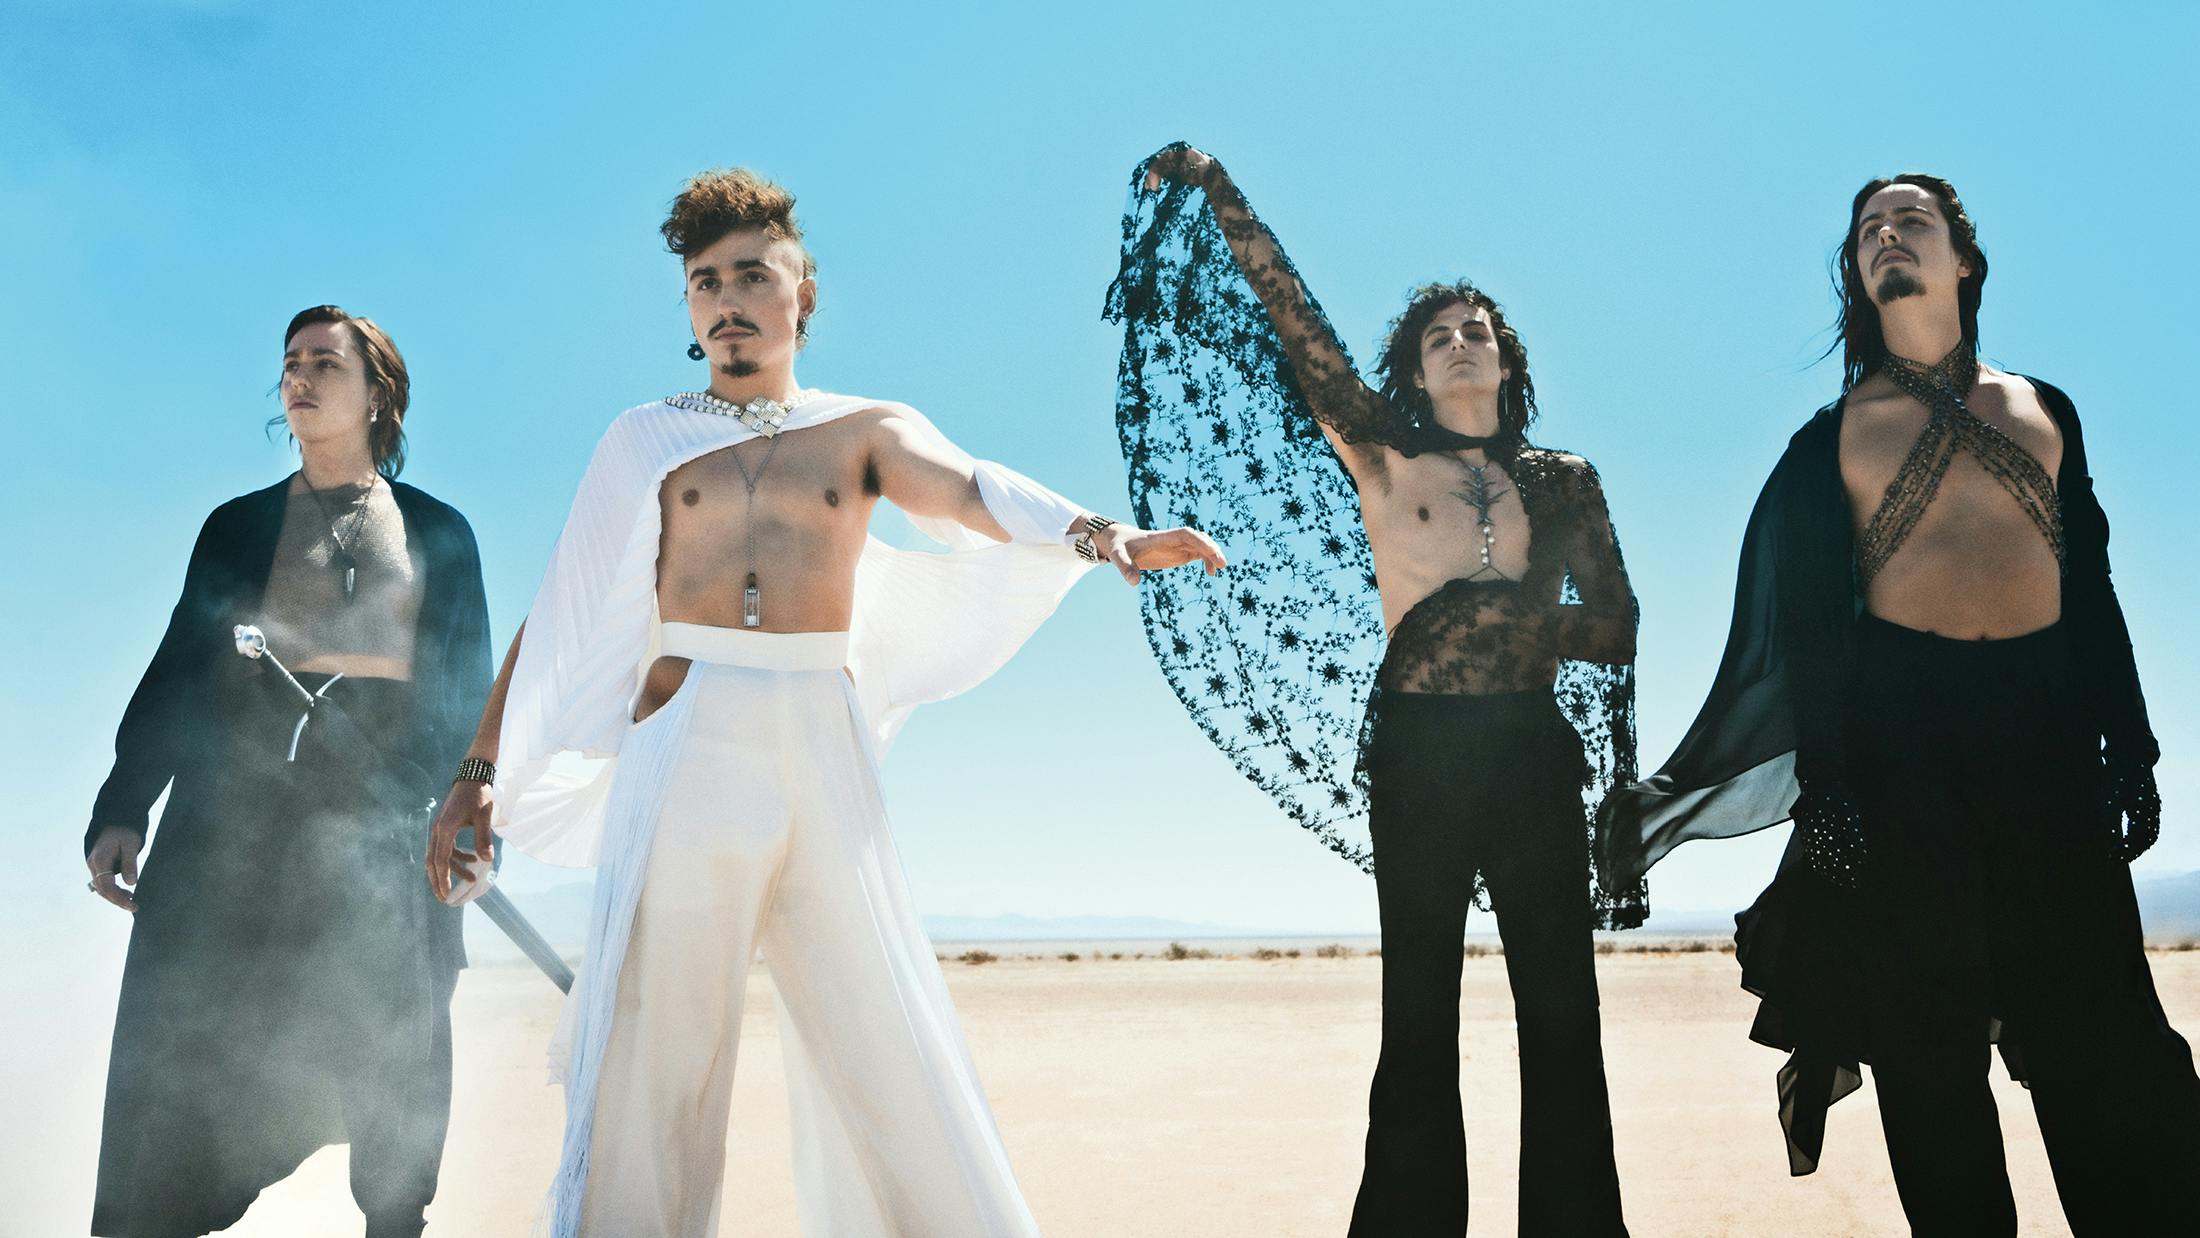 Greta Van Fleet: “The intention is to communicate an idea, to challenge people, to celebrate, to be present, and to heal”